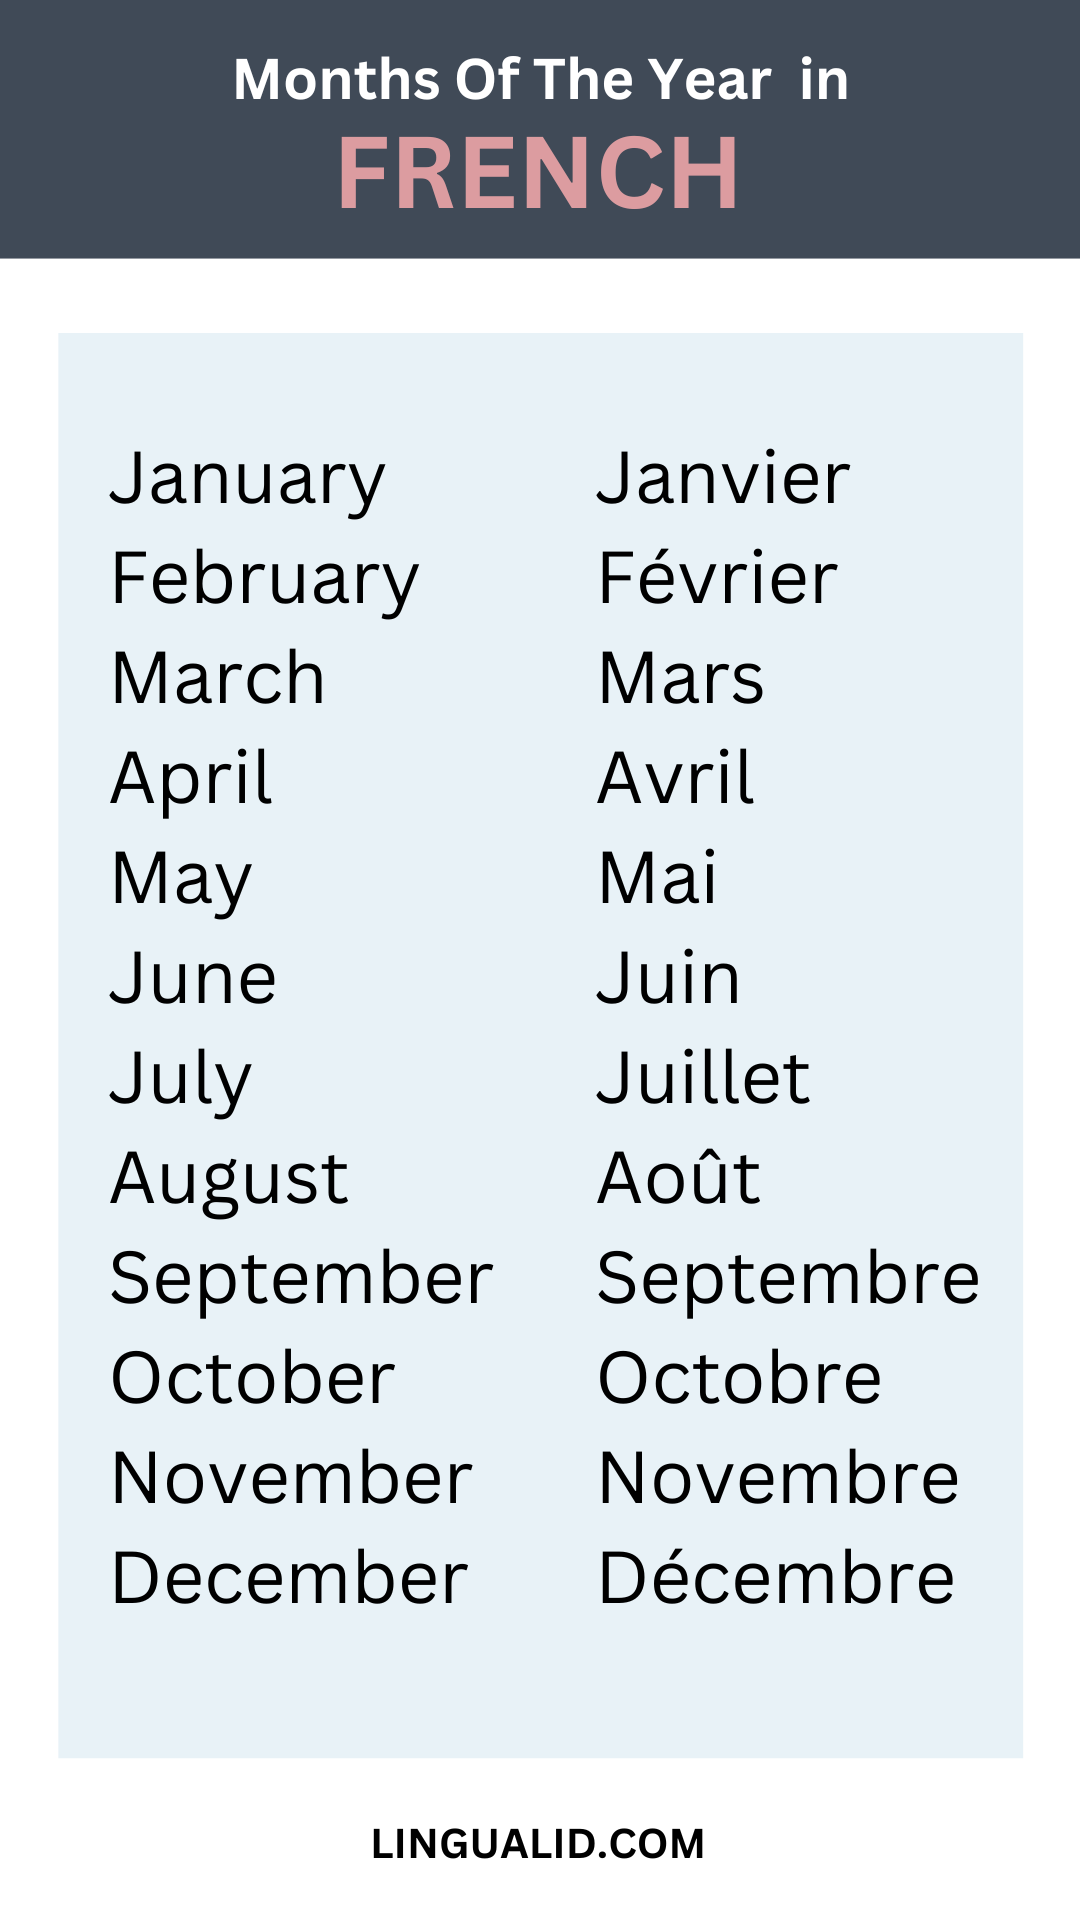 MONTHS OF THE YEAR IN FRENCH